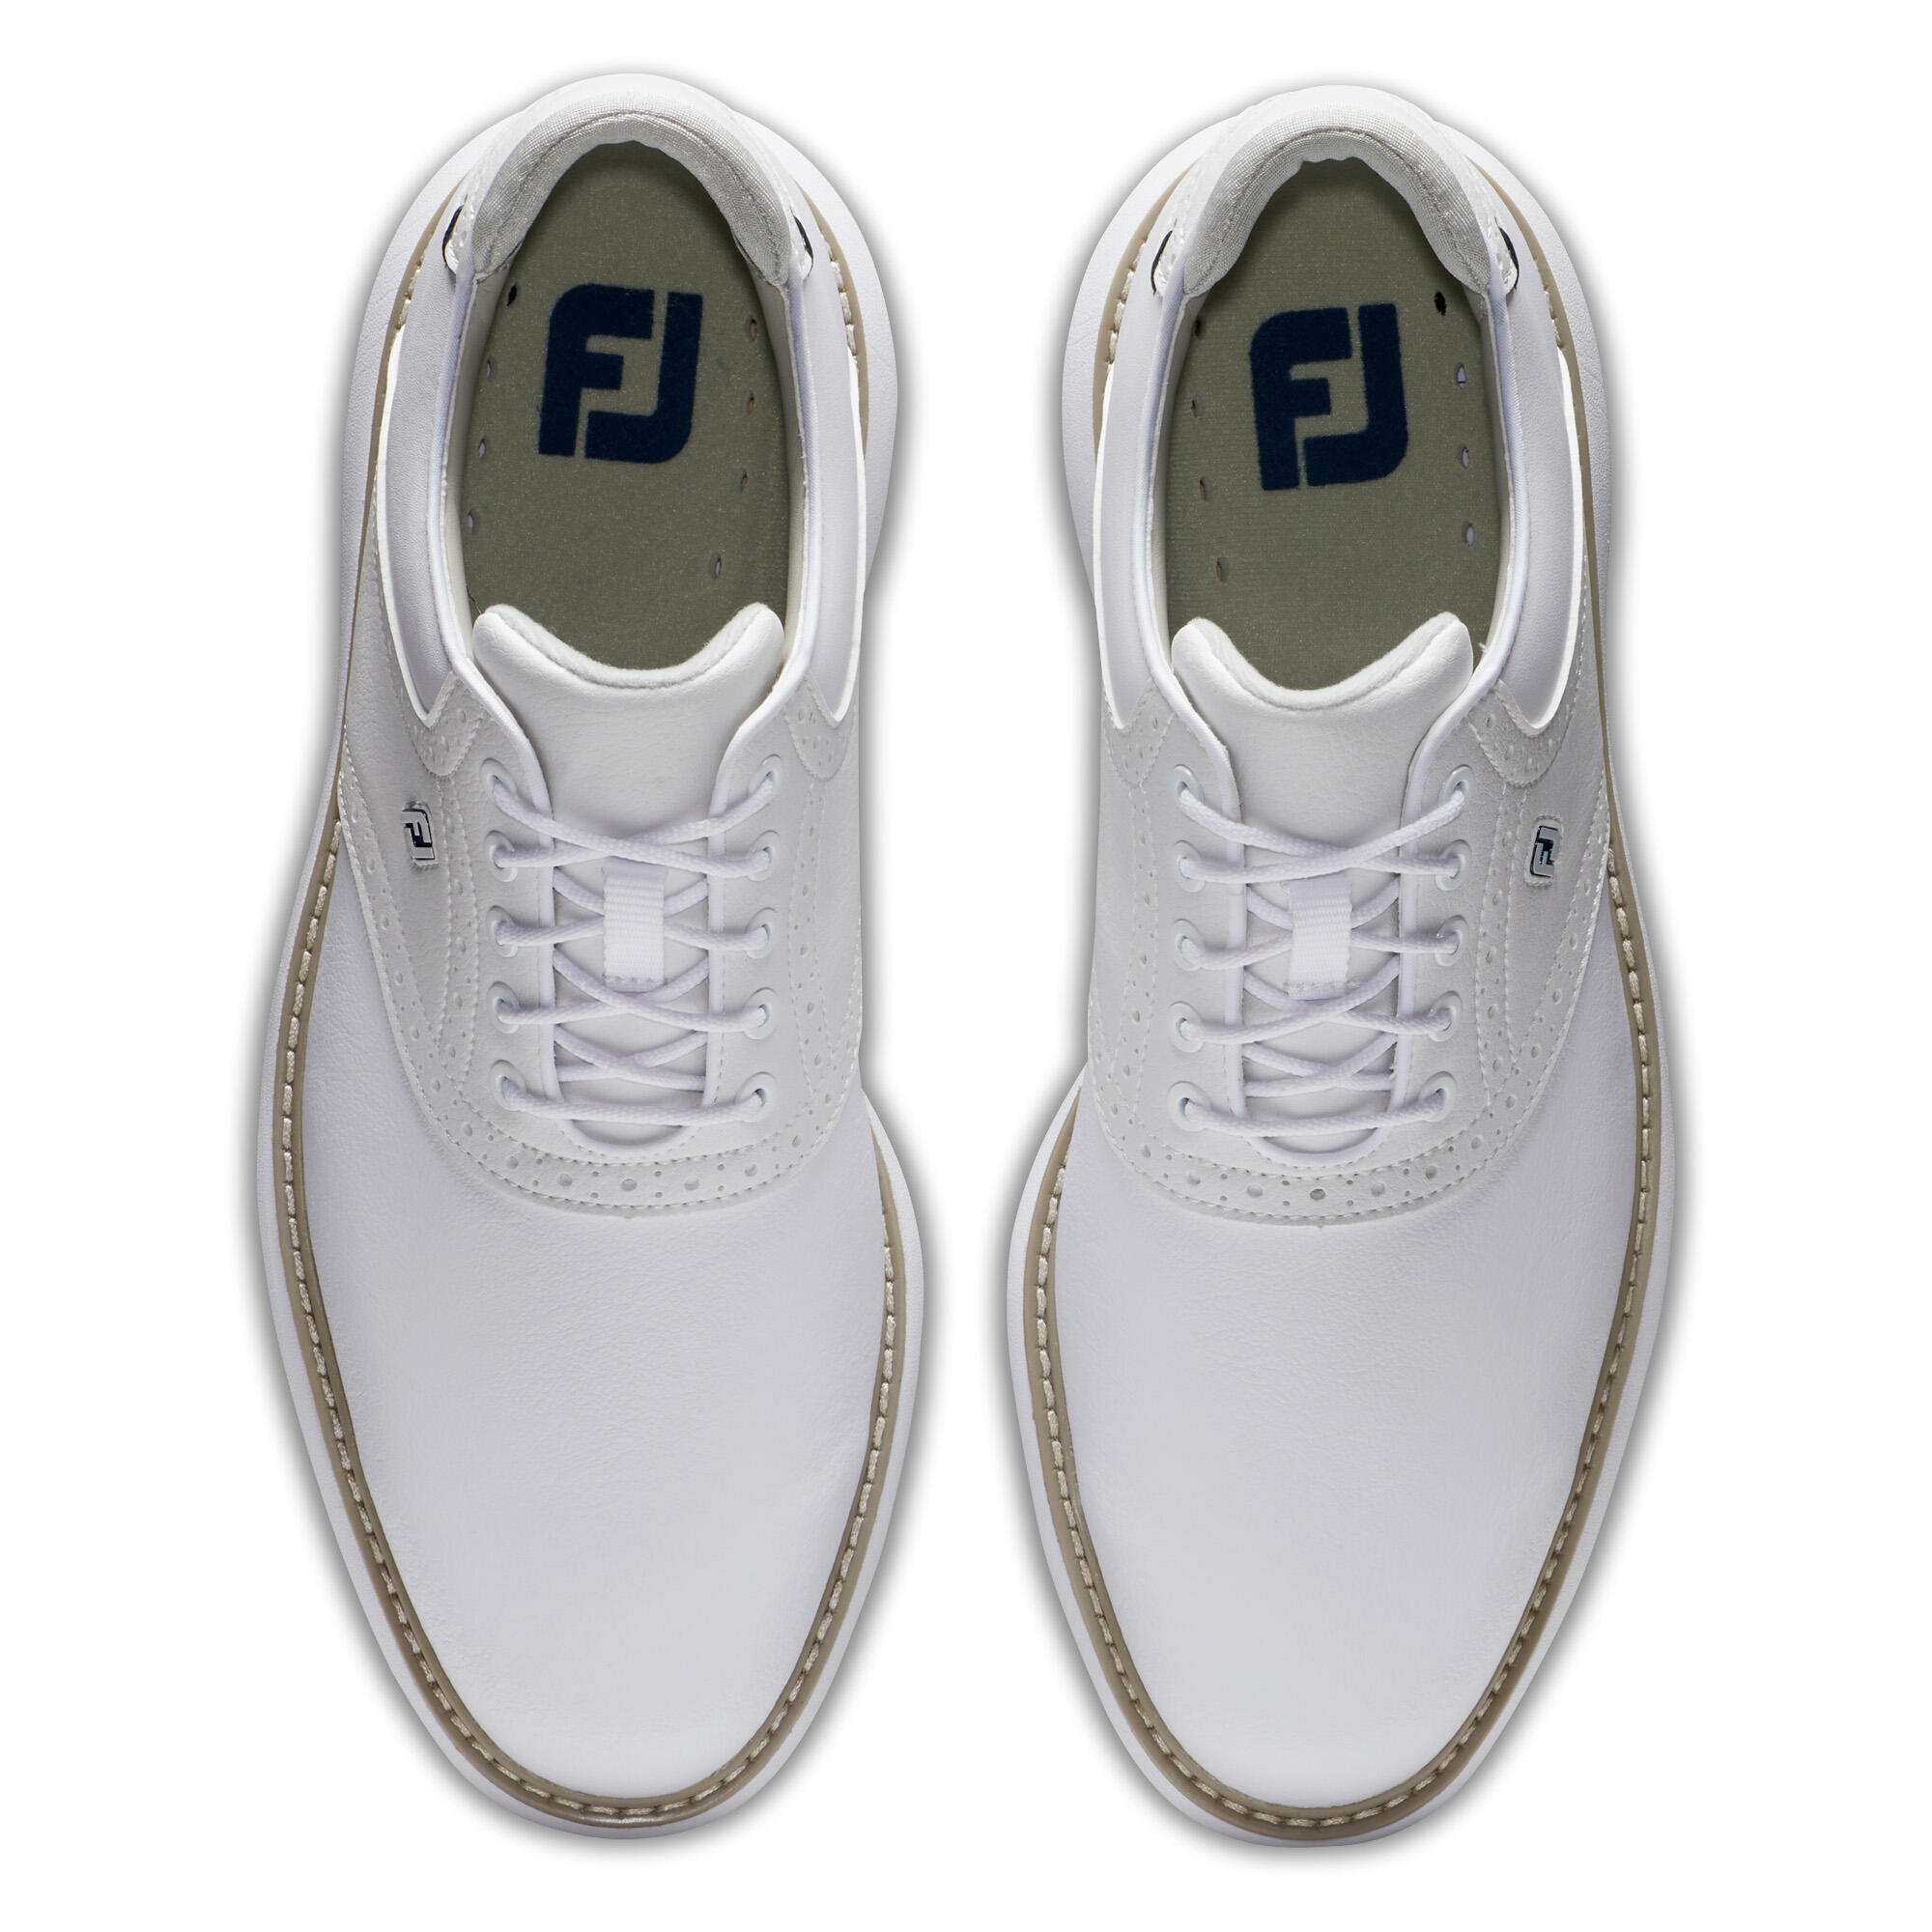 MEN'S GOLF SHOES FOOTJOY WATERPROOF - TRADITIONS WHITE 5/6